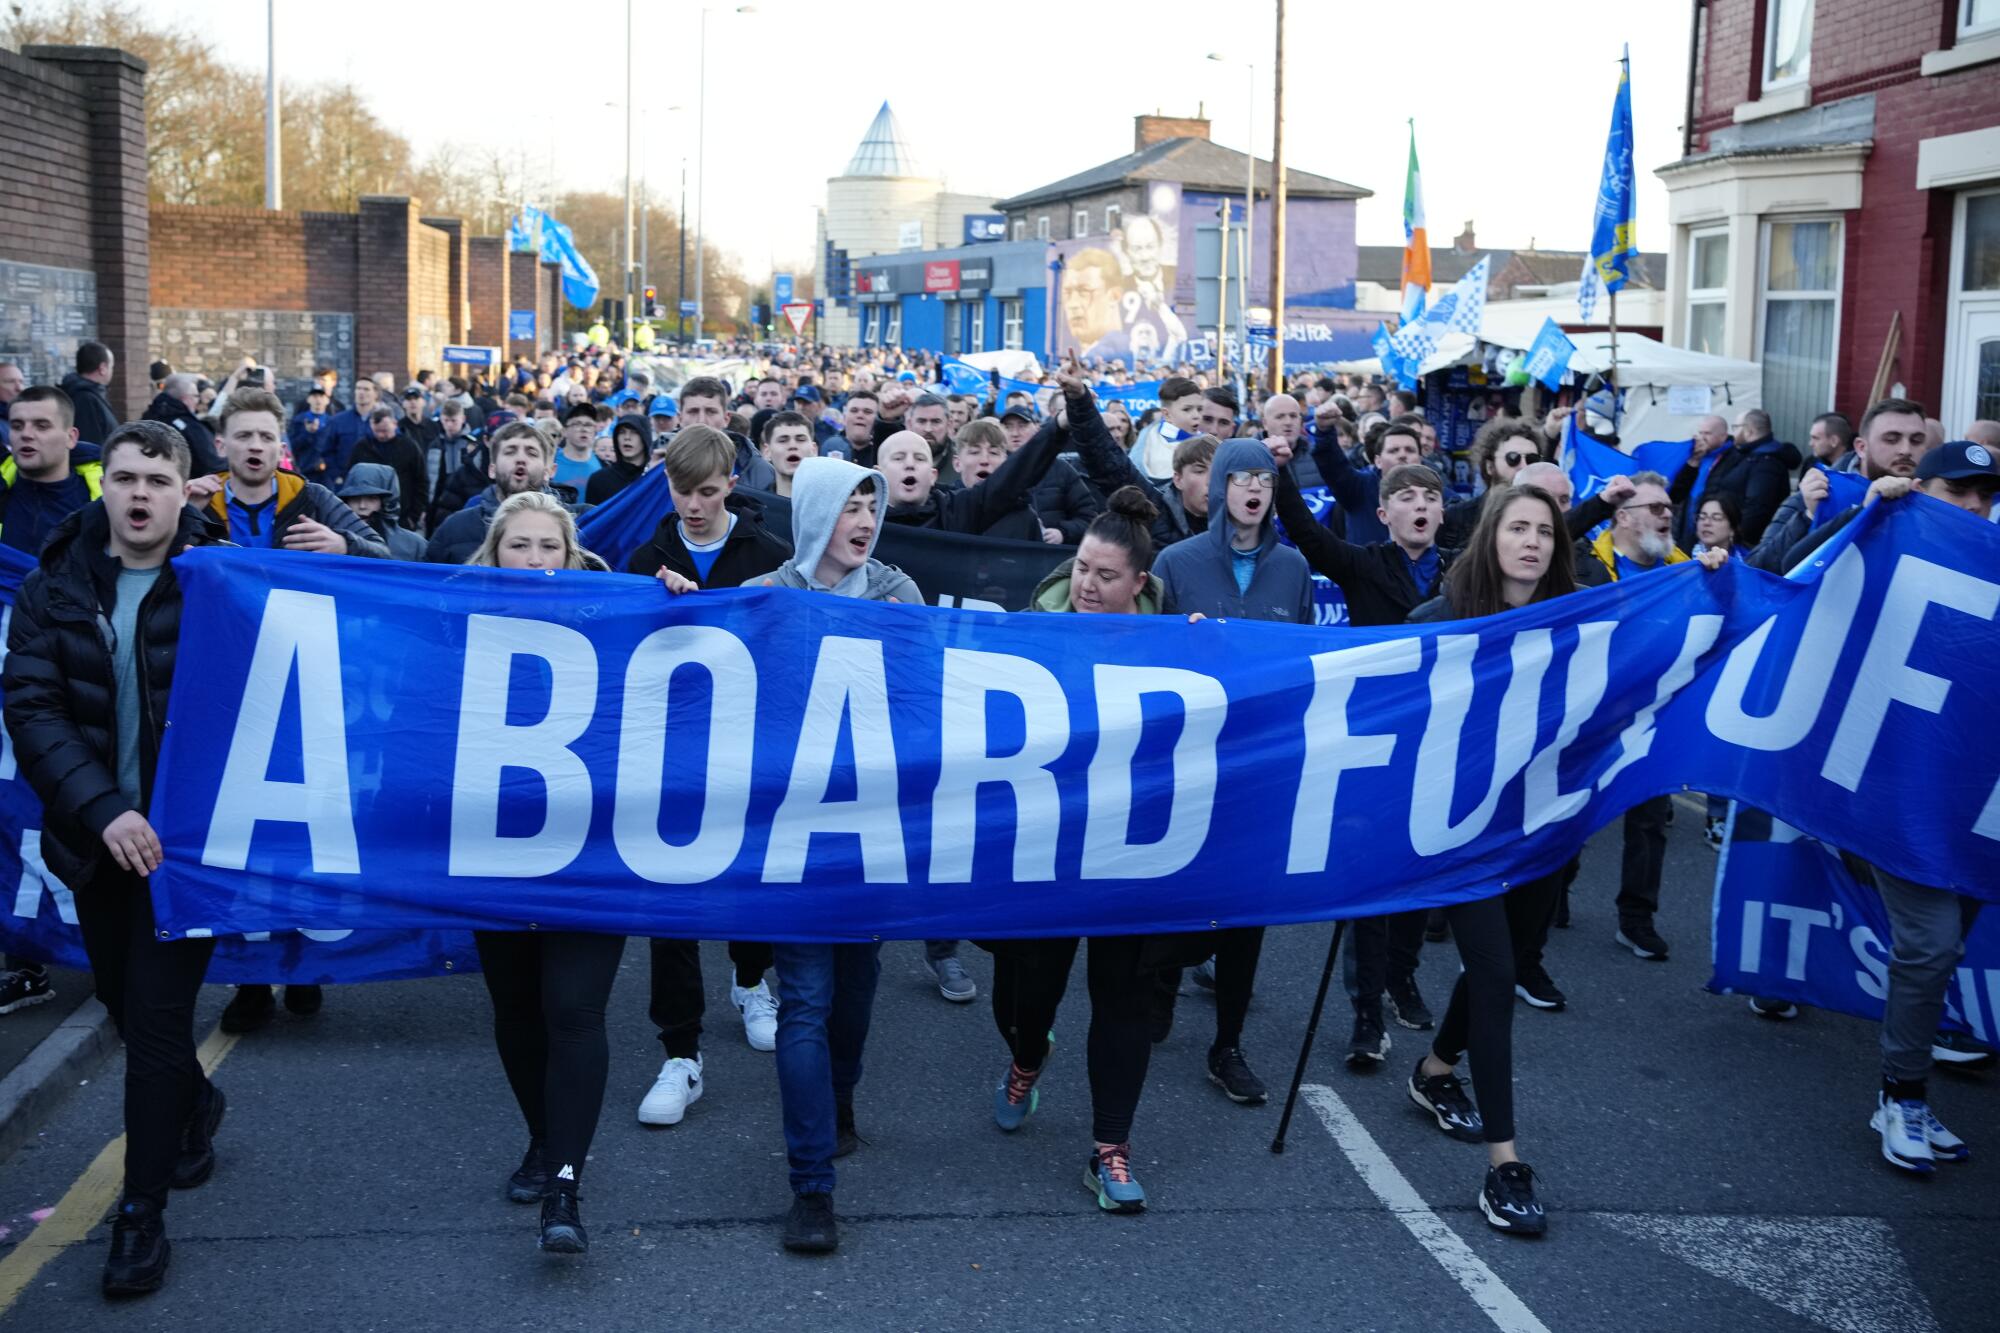 Everton supporters protest against the club's board as they make their way to a match.